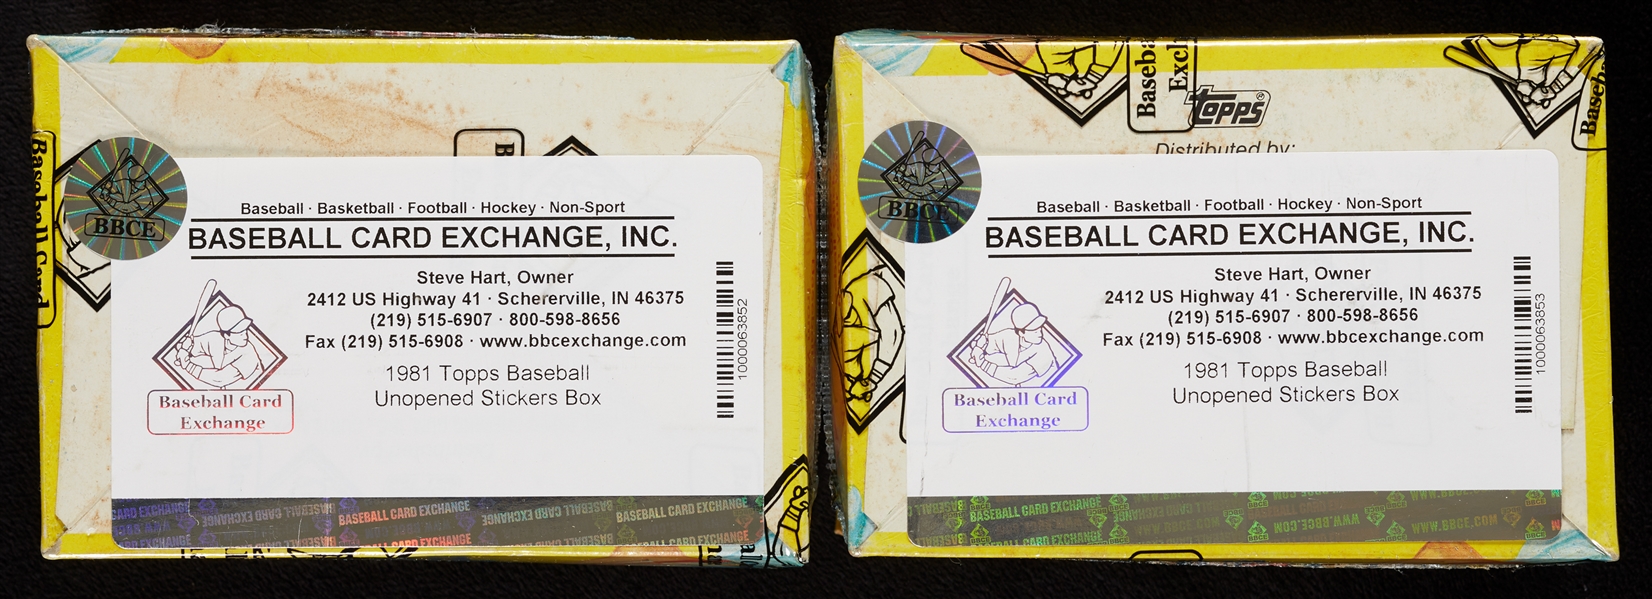 1981 Topps Baseball Stickers Boxes Pair (2) (BBCE)